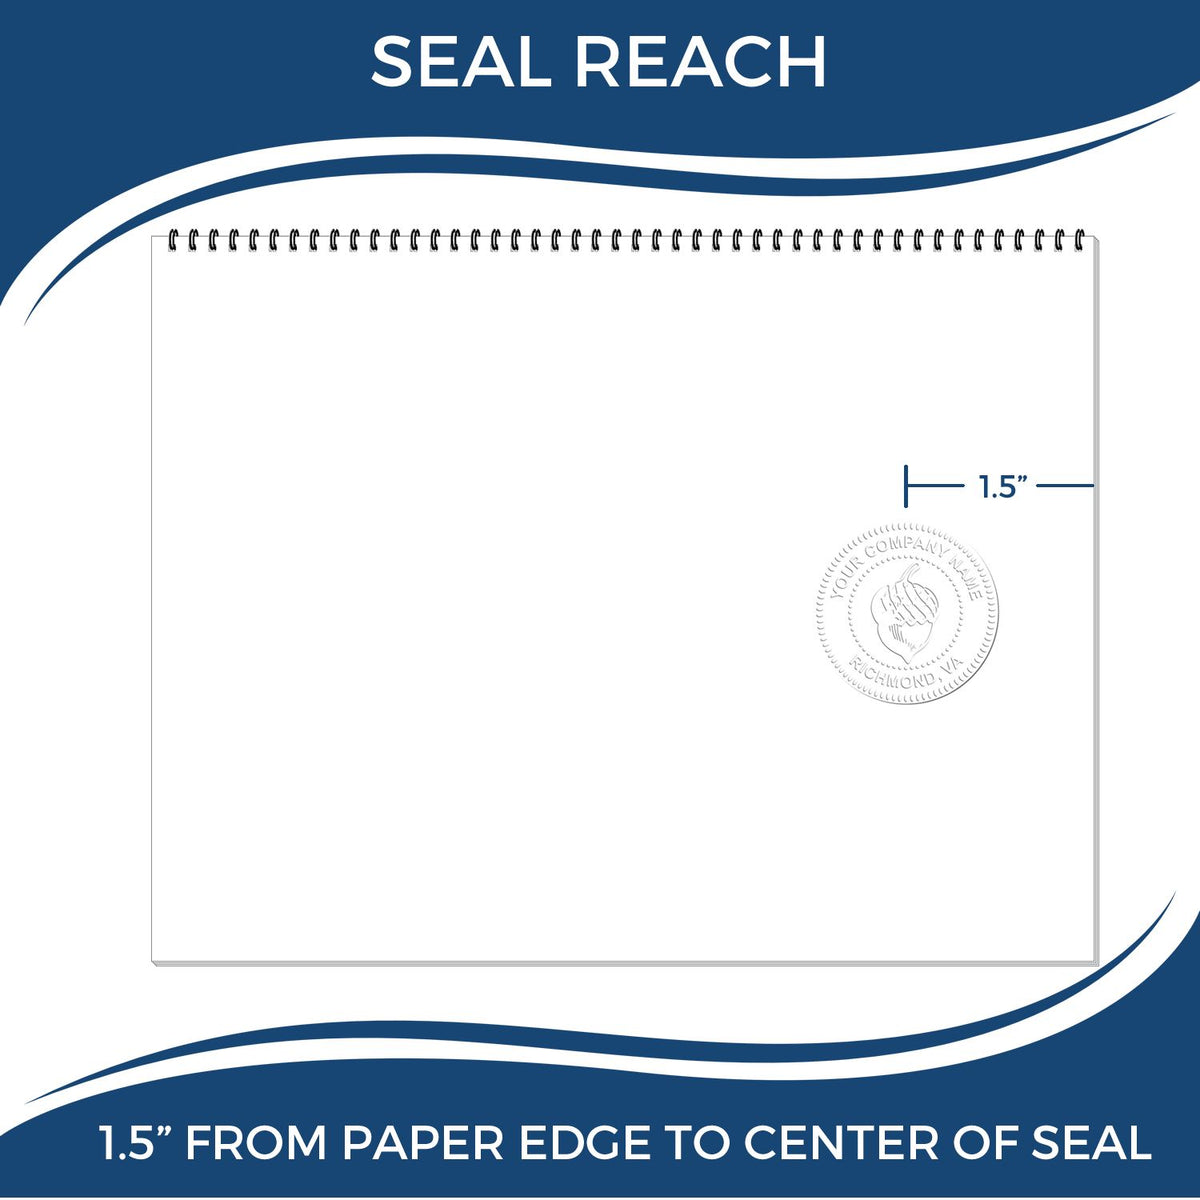 An infographic showing the seal reach which is represented by a ruler and a miniature seal image of the Gift Virginia Architect Seal